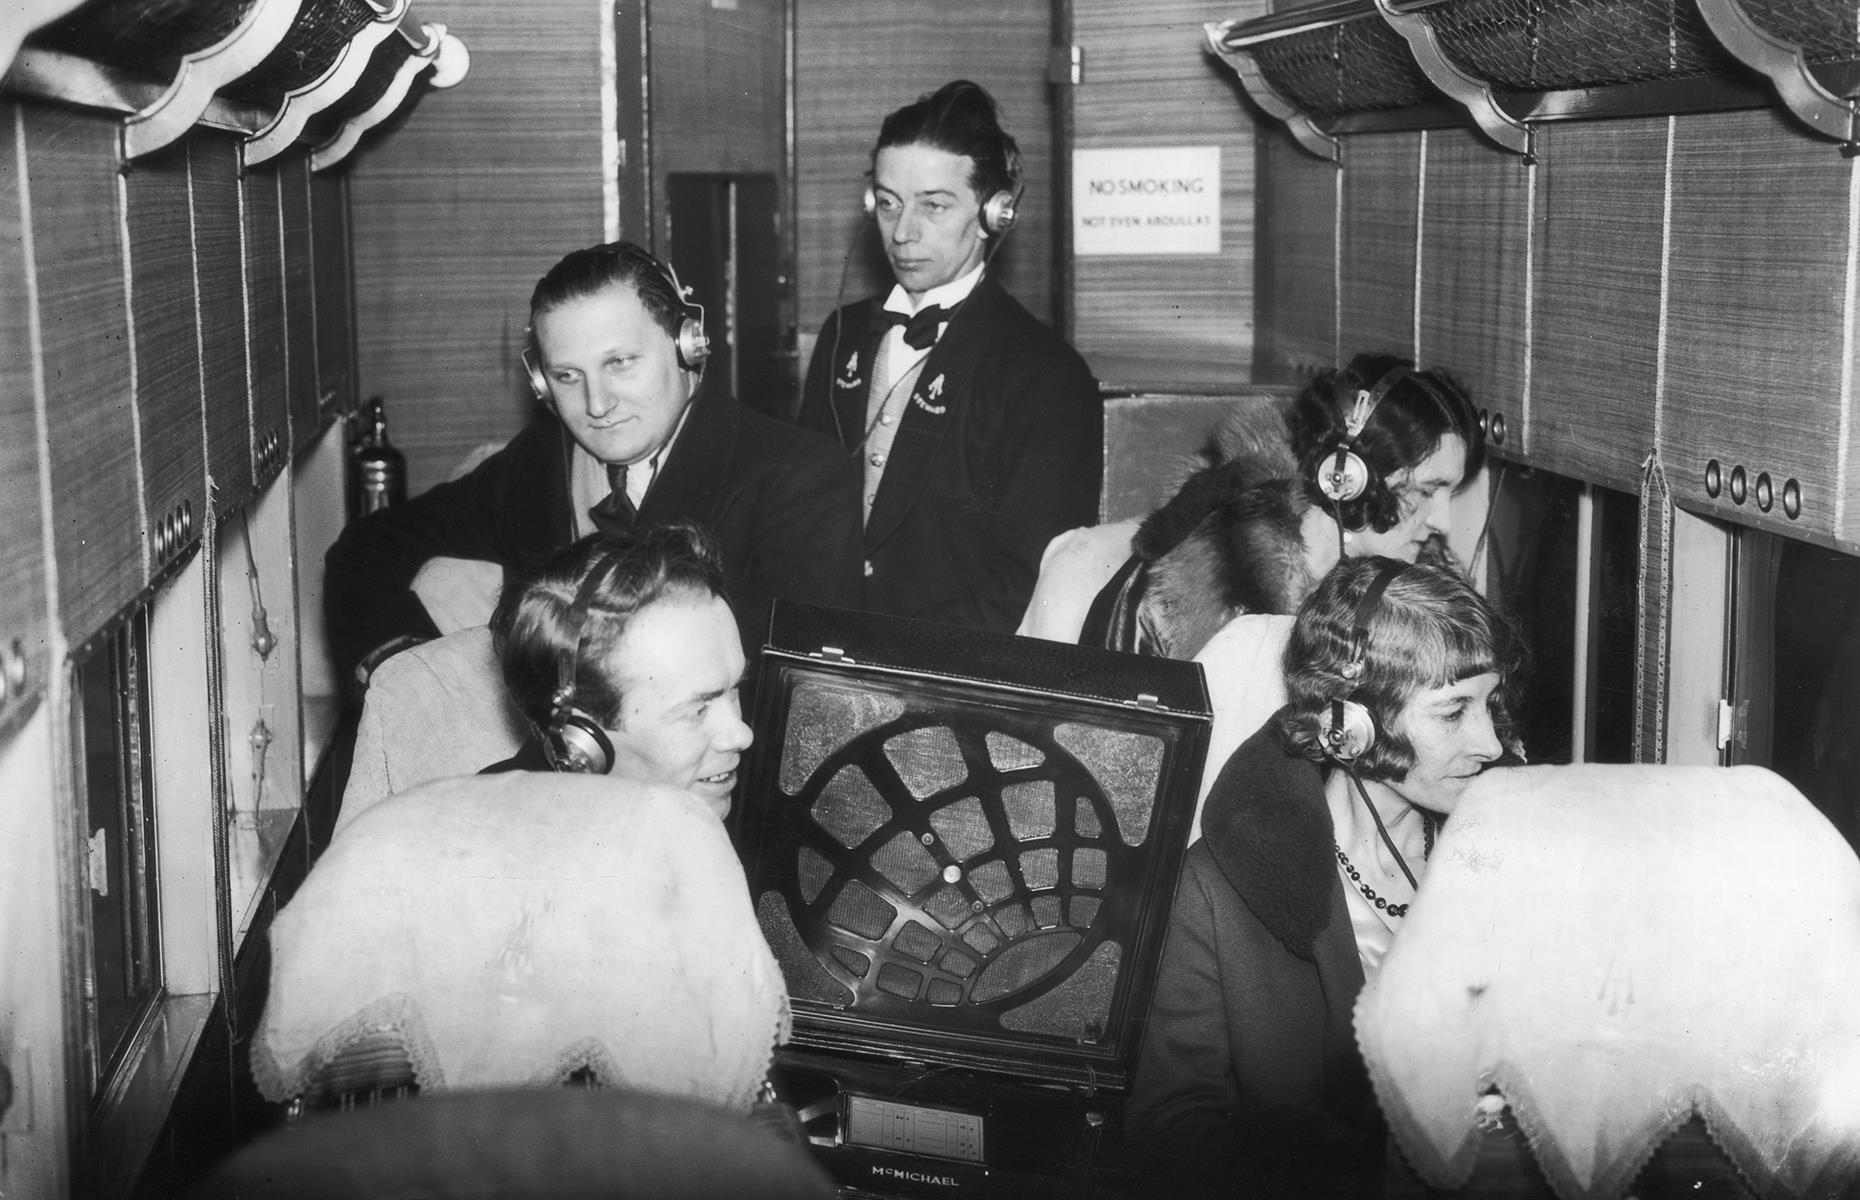 In-flight entertainment technology continued to improve too. This snap, taken in 1931, shows passengers listening to a live radio broadcast of the annual London boat race between Oxford and Cambridge universities.